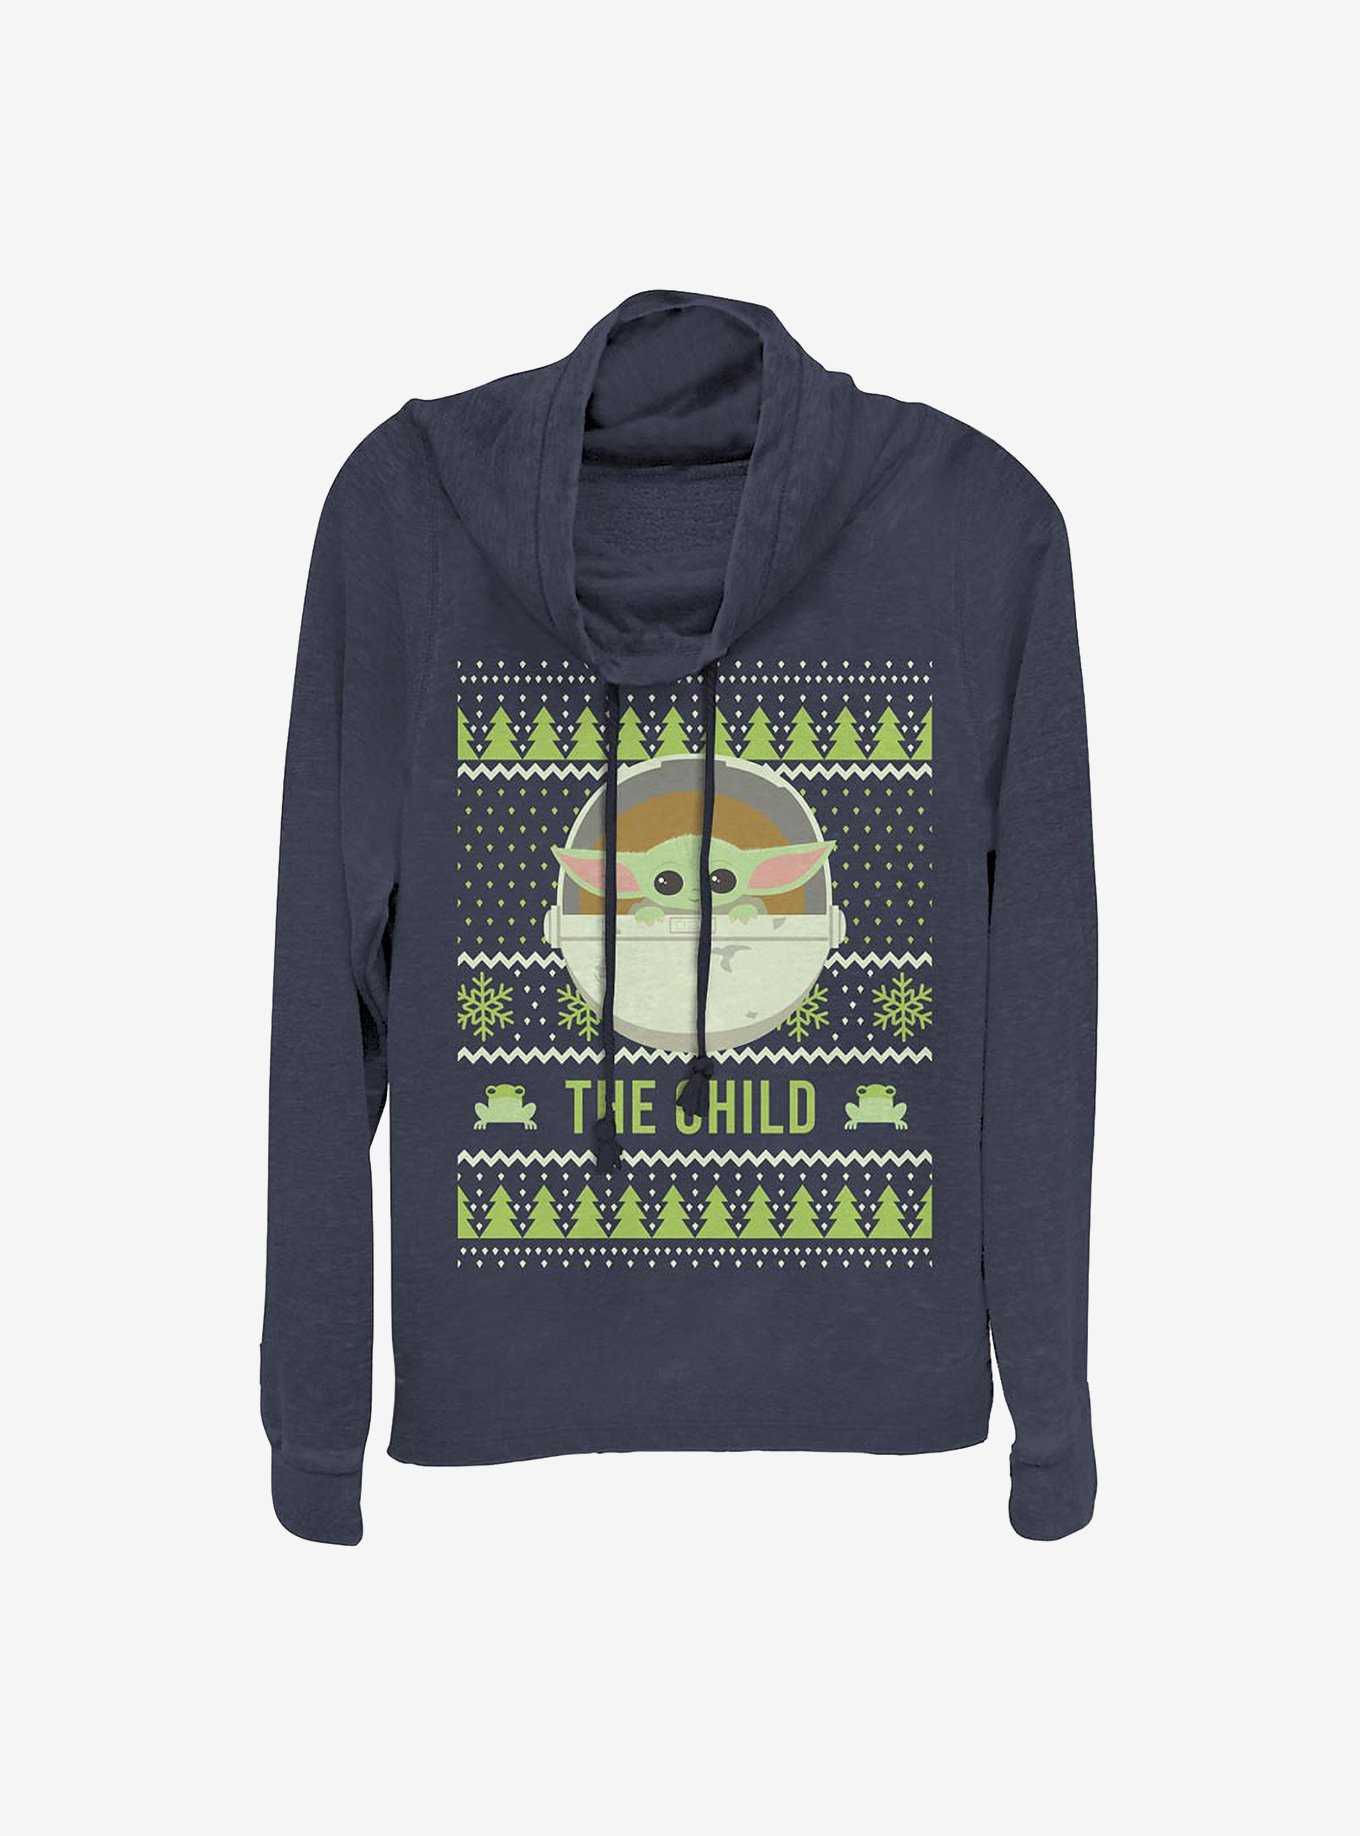 Star Wars The Mandalorian The Child Cute Ugly Sweater Cowlneck Long-Sleeve Girls Top, , hi-res